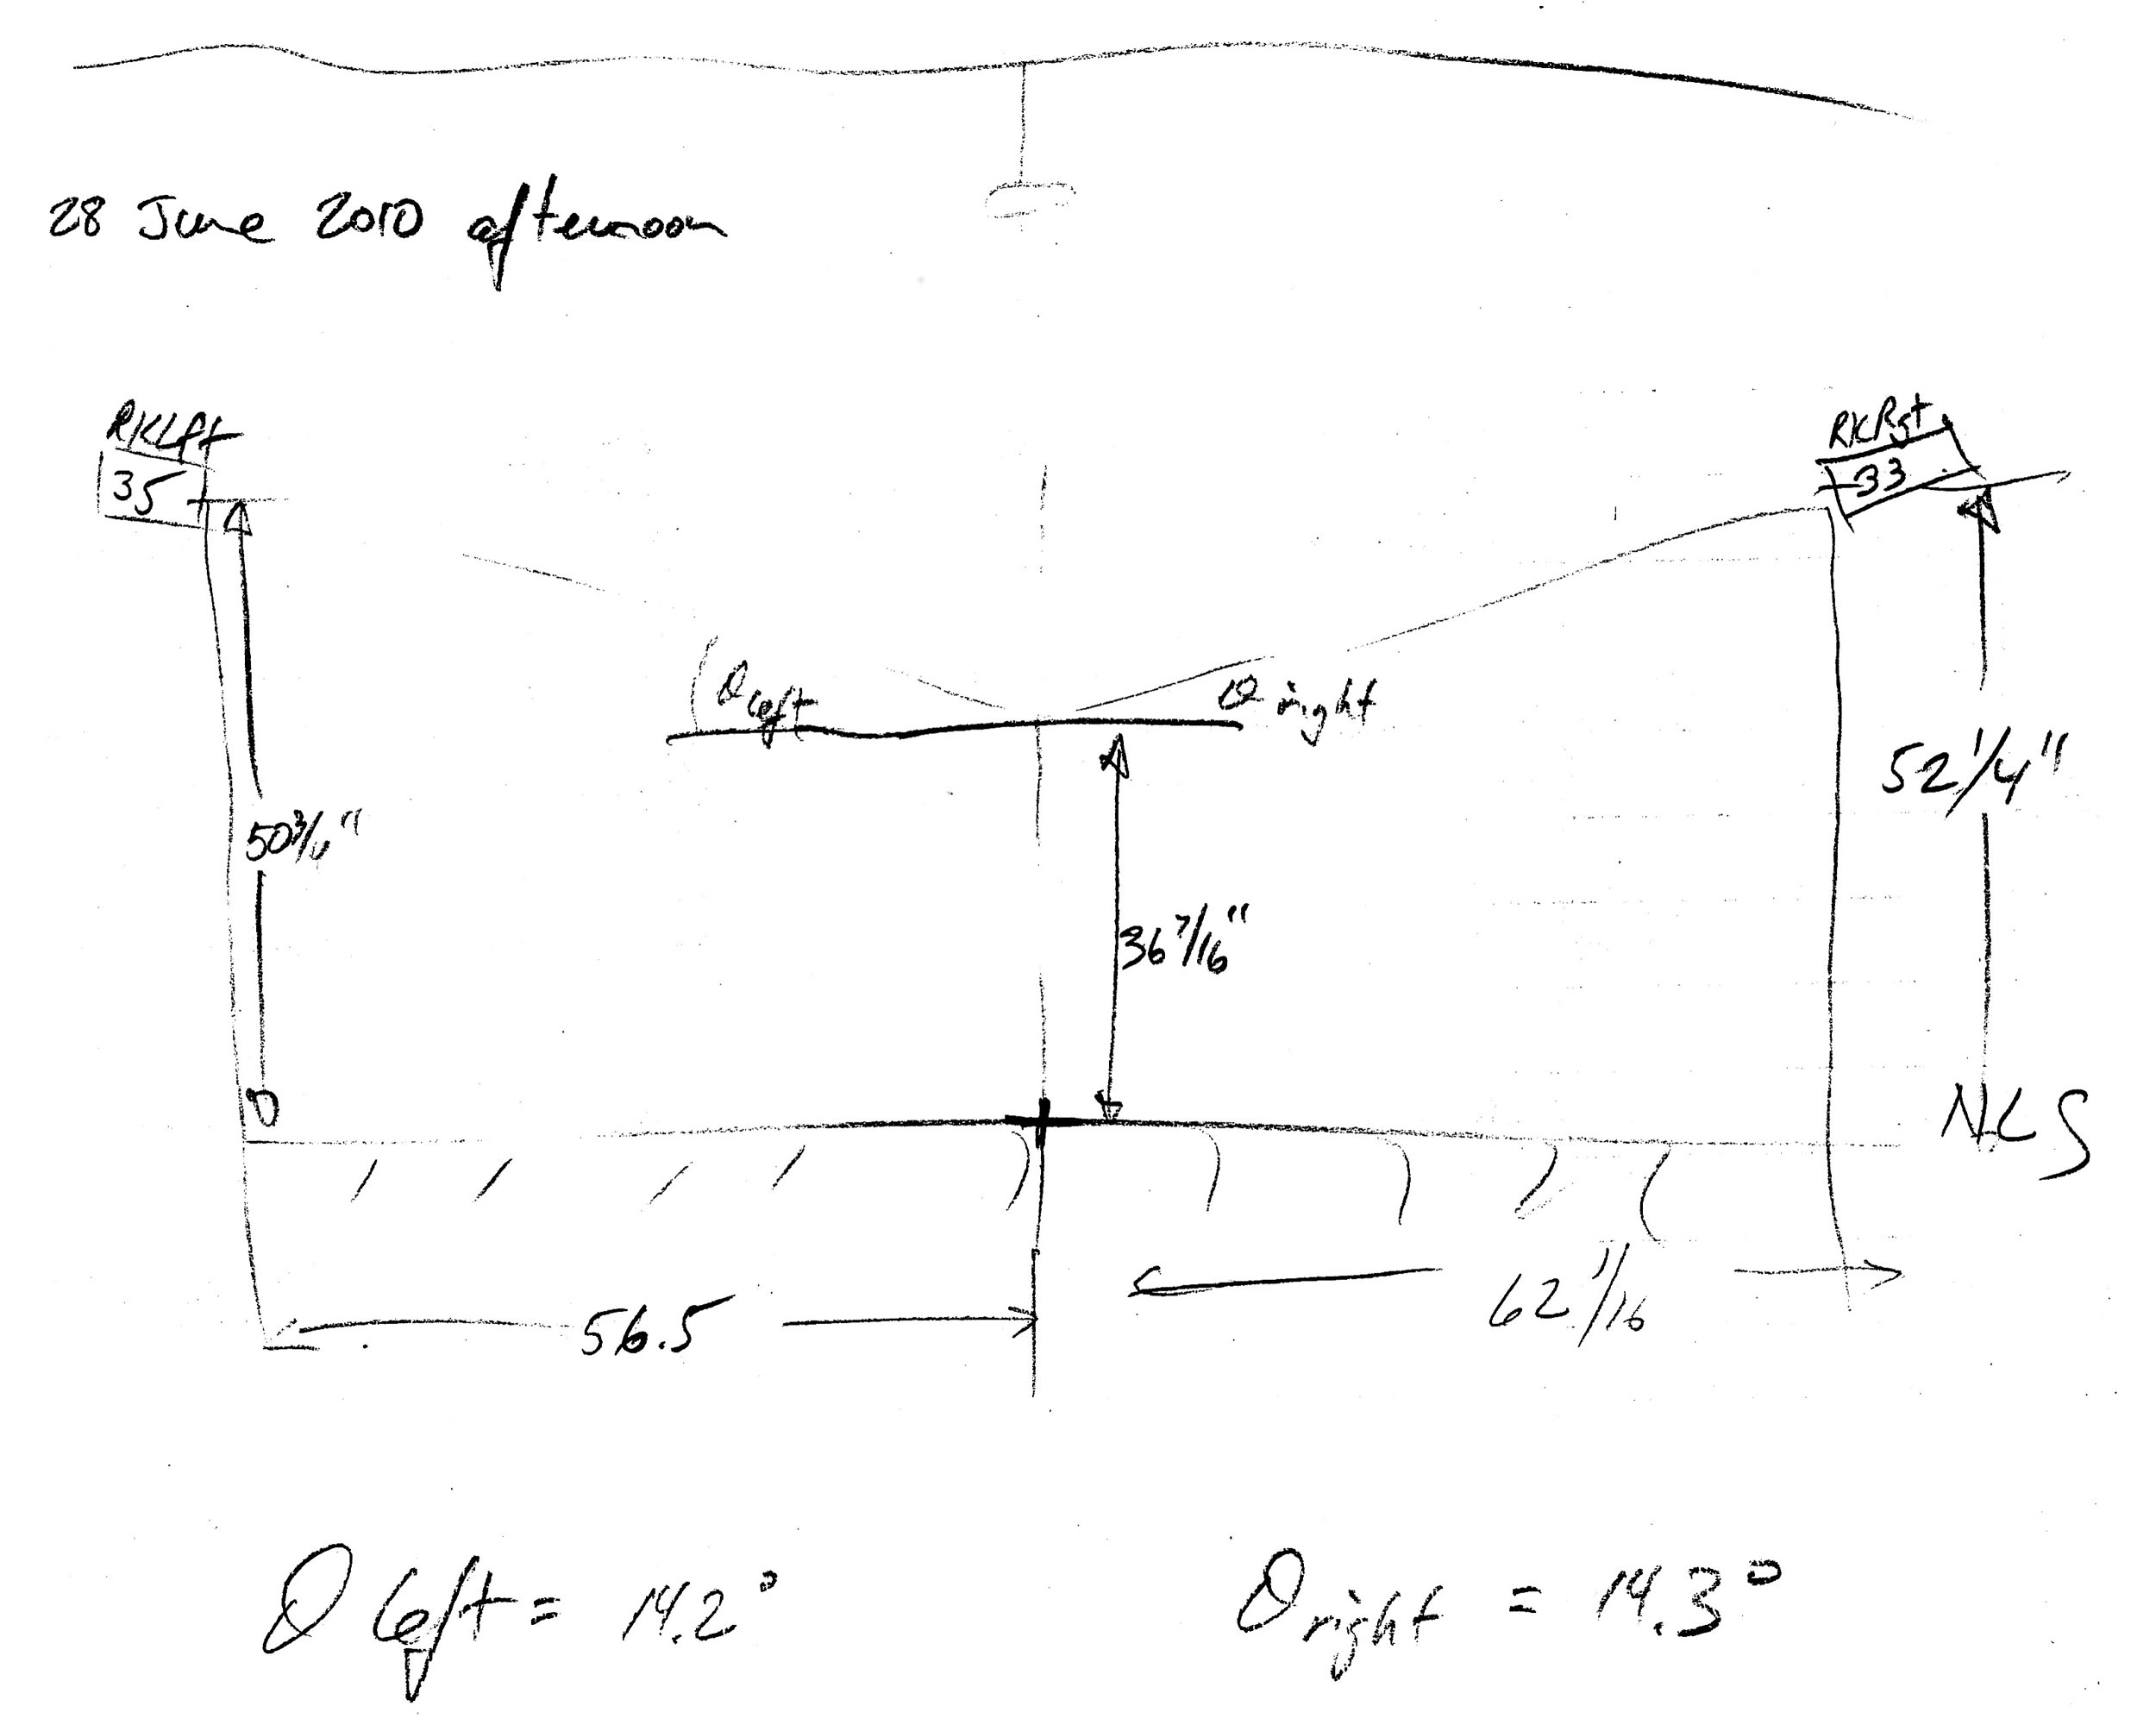 Sketch diagram of the raking light setup used for spectrally imaging both the 1870 and 1871 Field Diaries at the National Library of Scotland, 28 June 2010. Copyright Michael B. Toth. Creative Commons Attribution-NonCommercial 3.0 Unported (https://creativecommons.org/licenses/by-nc/3.0/).